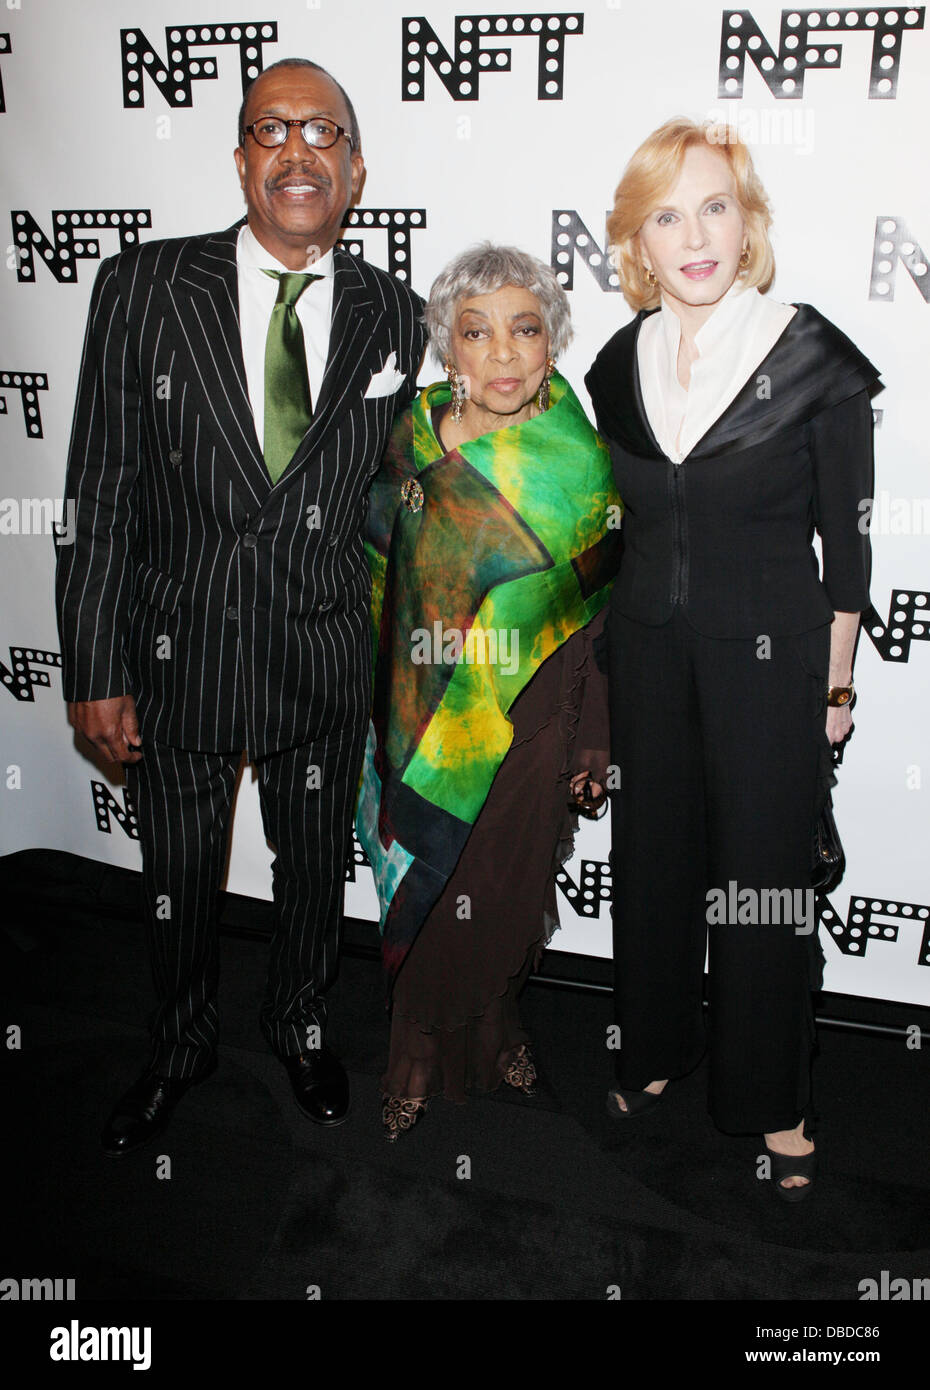 George Faison, Ruby Dee, Pia Lindstrom Woodie King, Jr.New Federal Theatre 40th Anniversary Gala at The Edison Ballroom New York City, USA - 22.05.11 Stock Photo